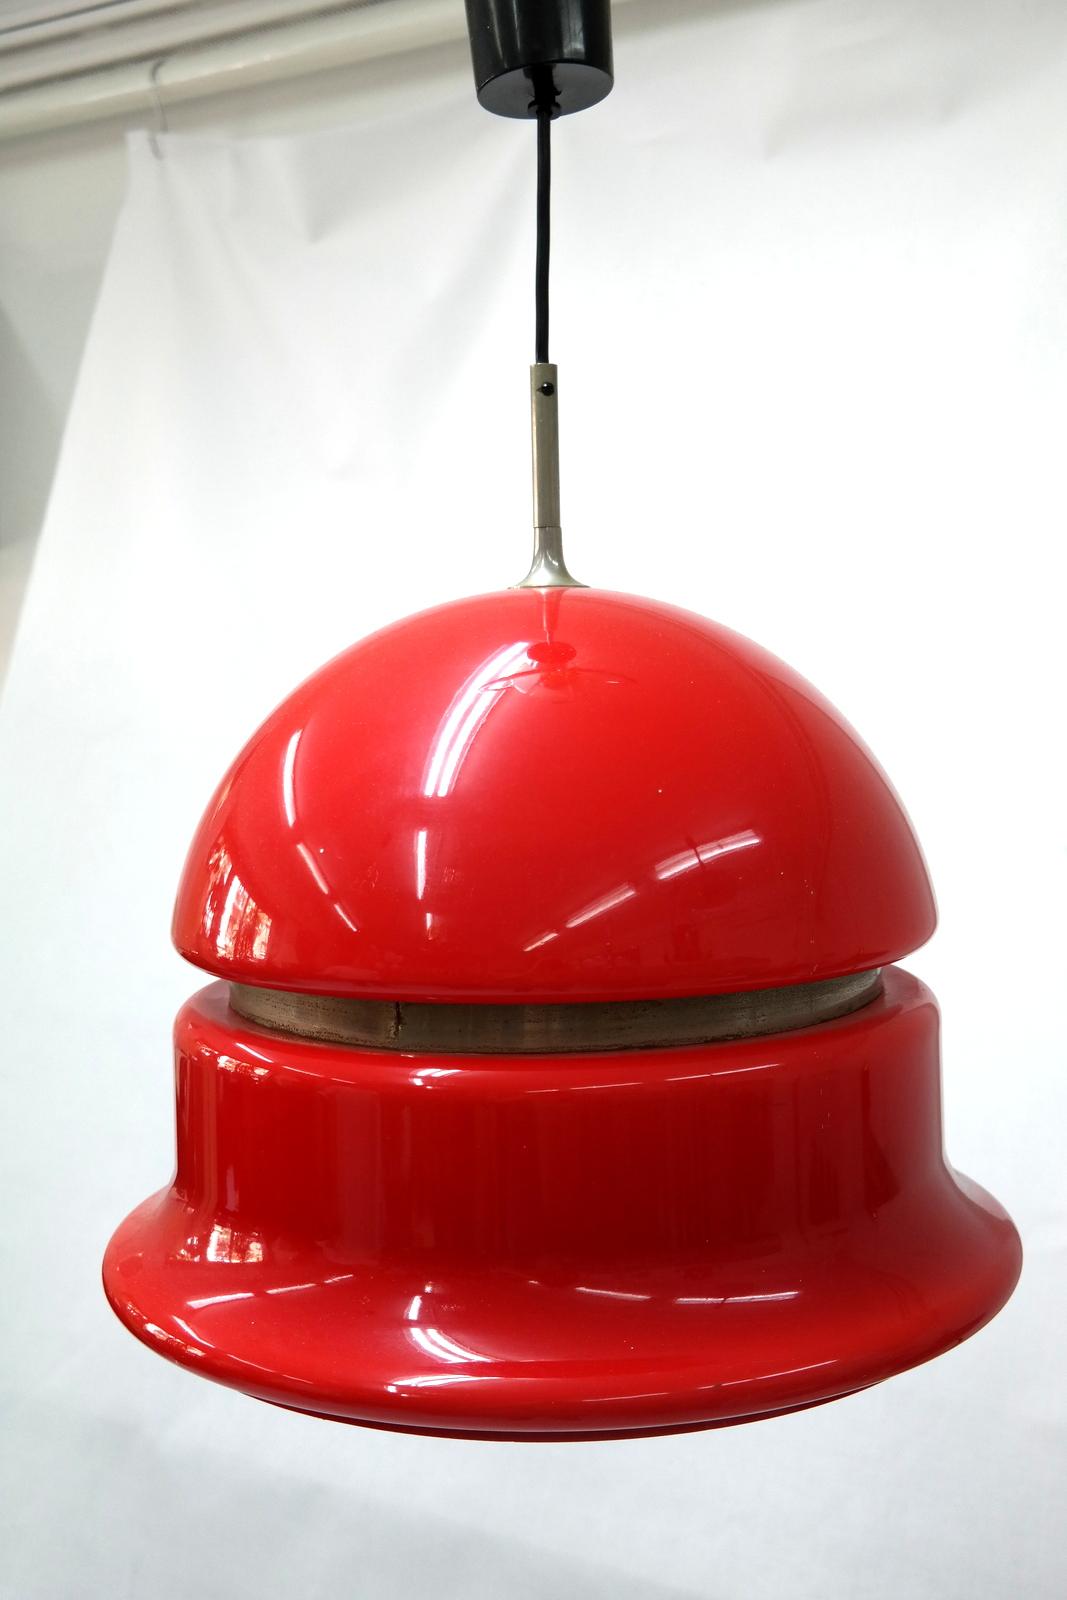 Italian Meblo style Space Age Plexiglas chandelier in deep red color with nickel-plated side line, 1960s.